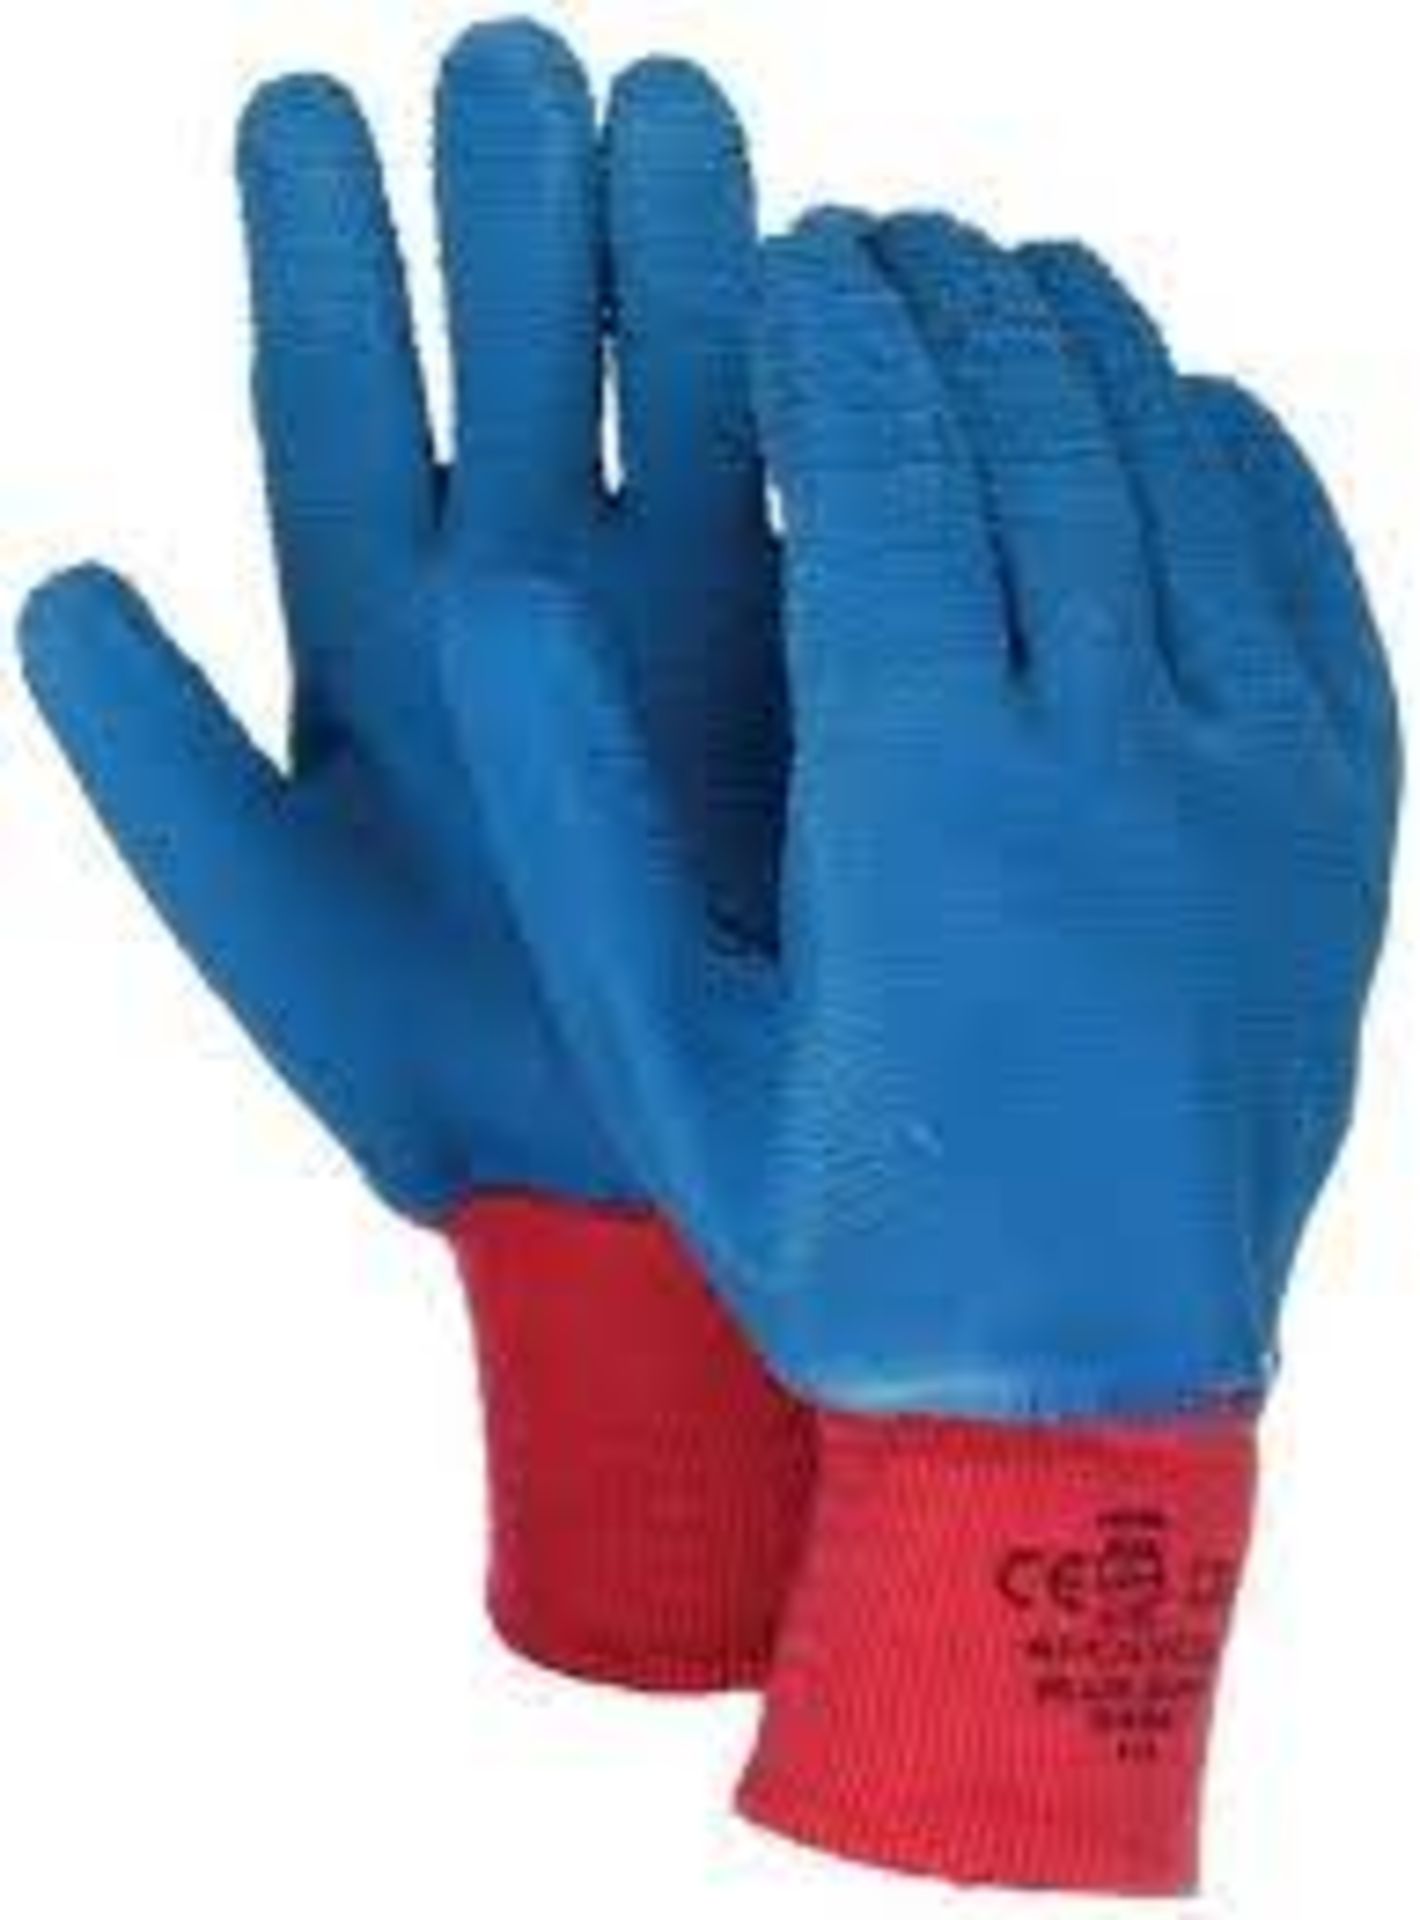 500 X BRAND NEW POLYCO BLUE GRIP WORK GLOVES 840 SIZE 8 RRP £5.50 EACH